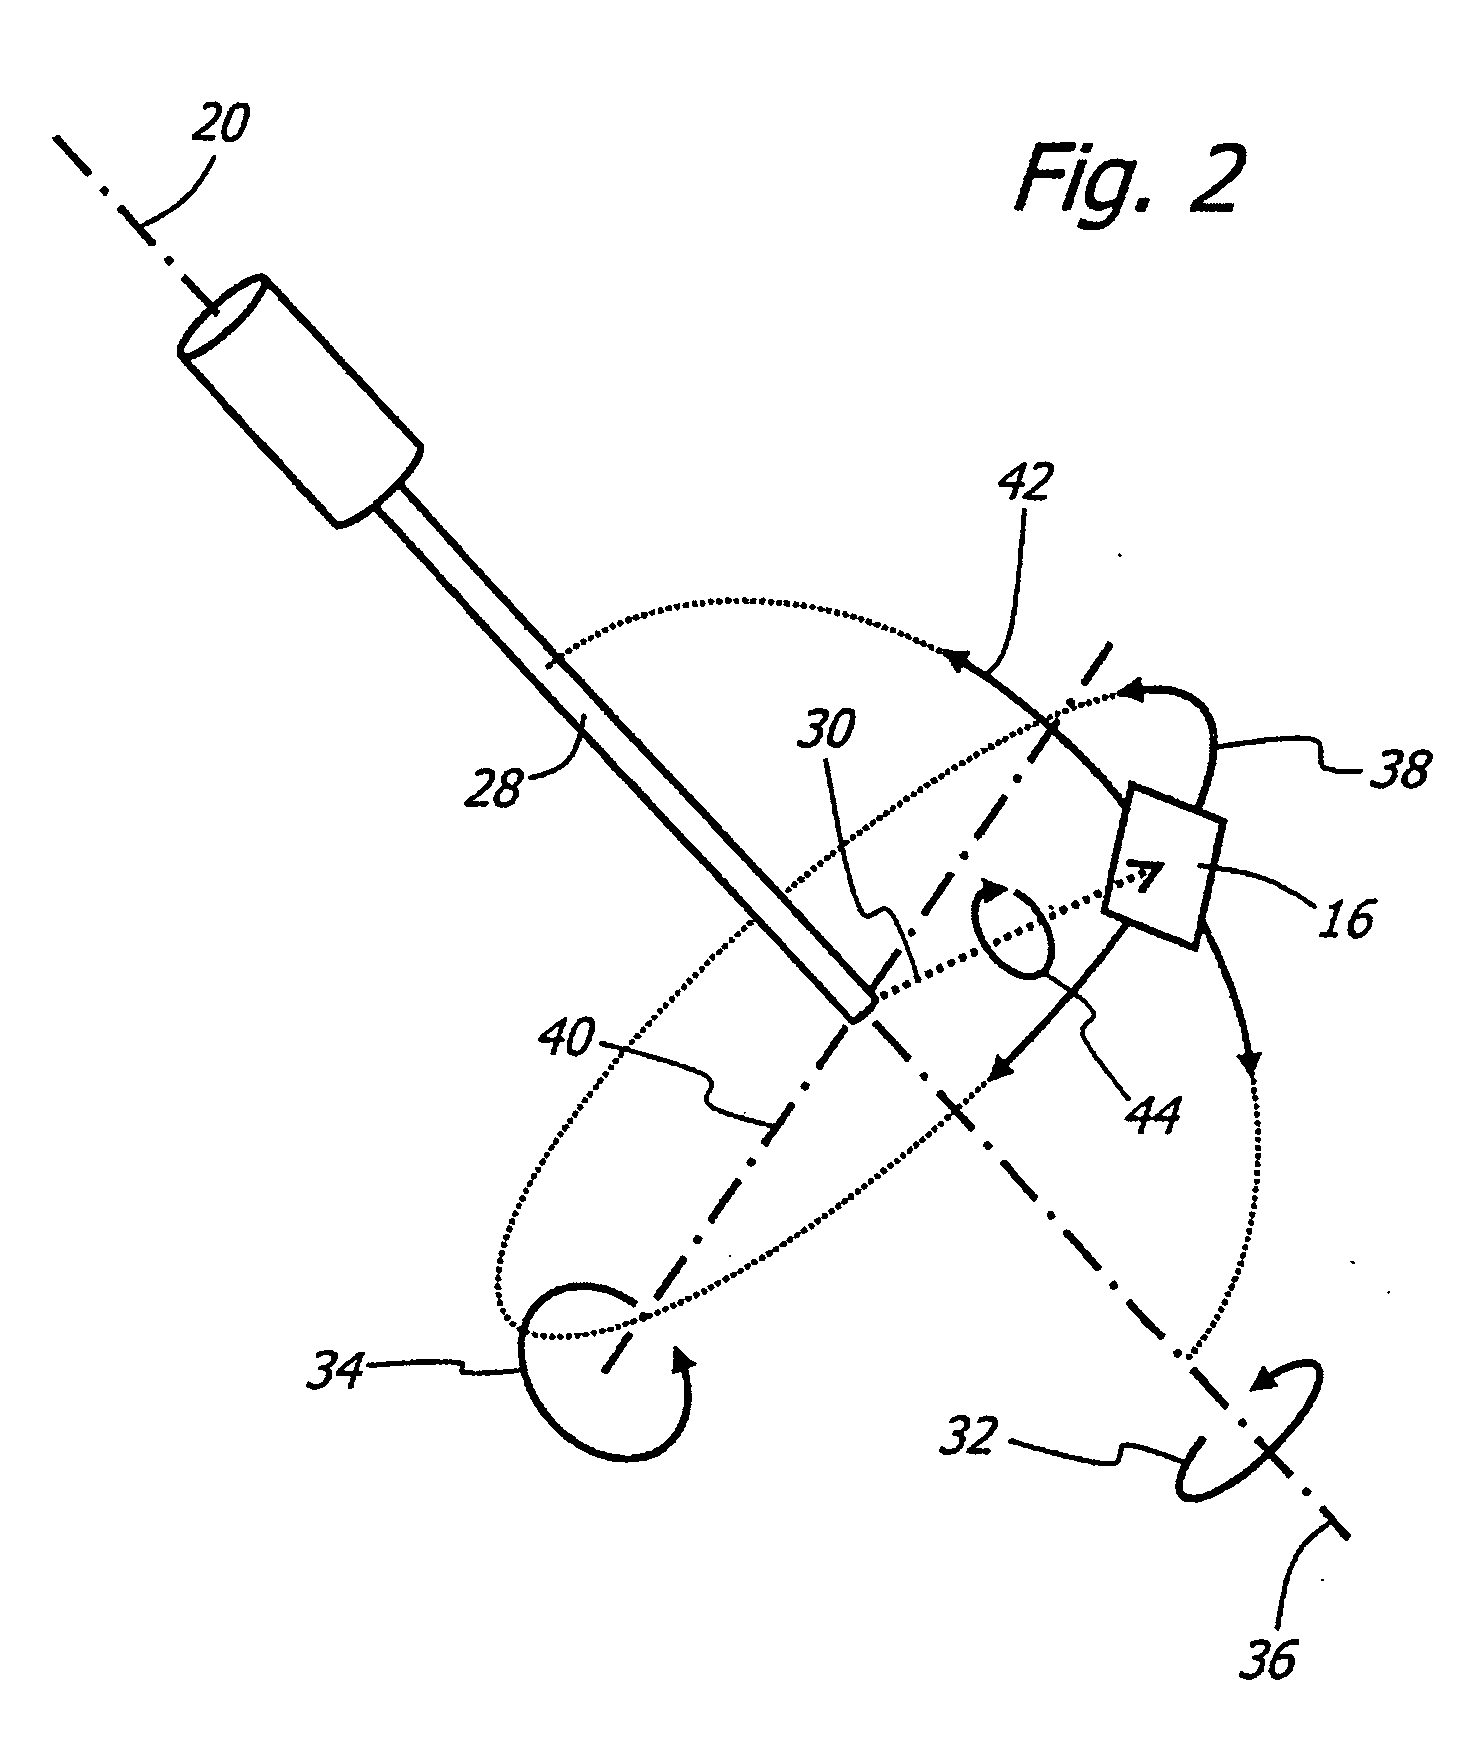 Illumination system for variable direction of view instruments